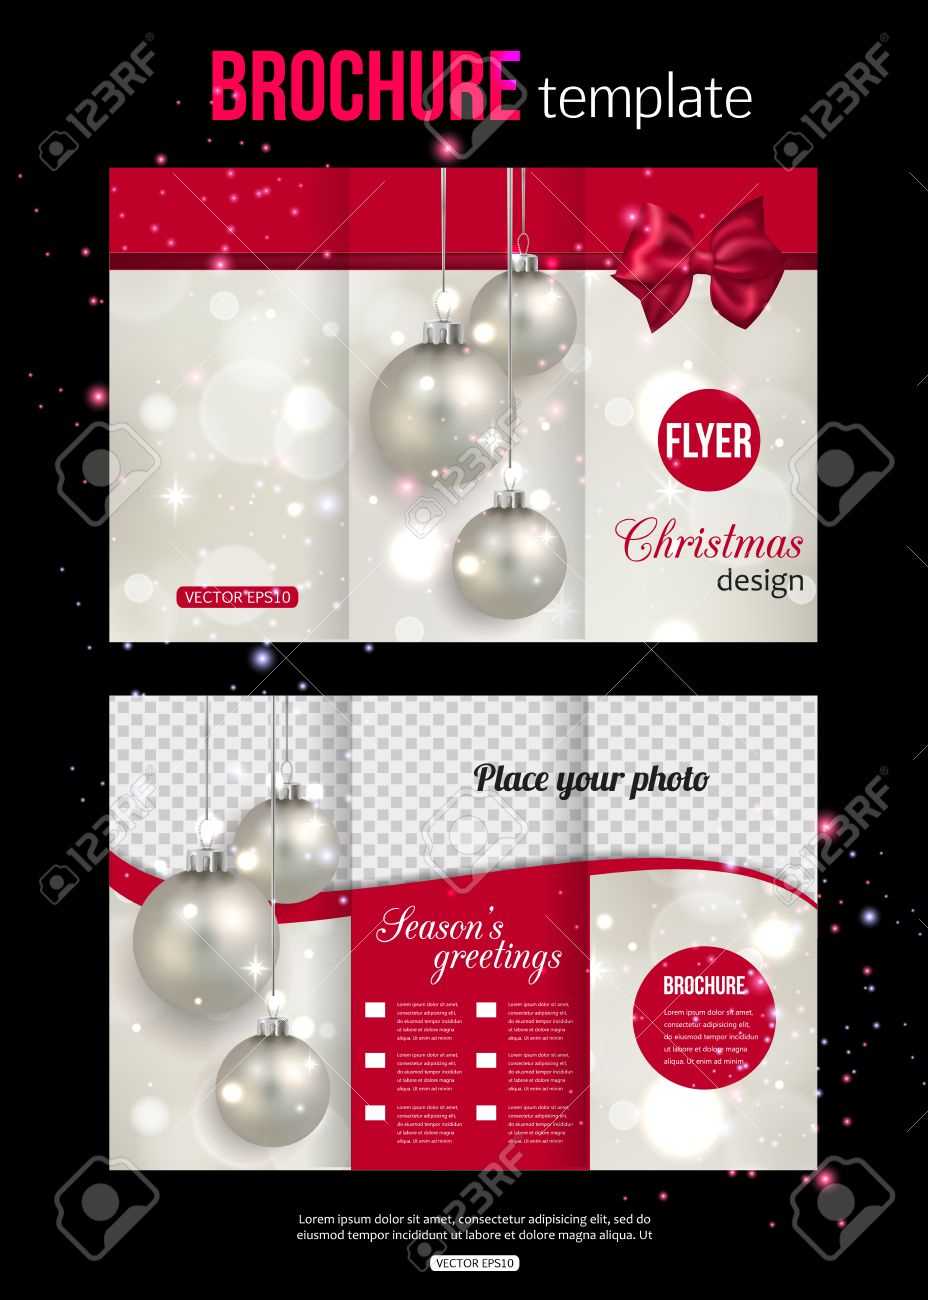 Christmas Trifold Brochure Template. Abstract Flyer Design With.. Regarding Christmas Brochure Templates Free